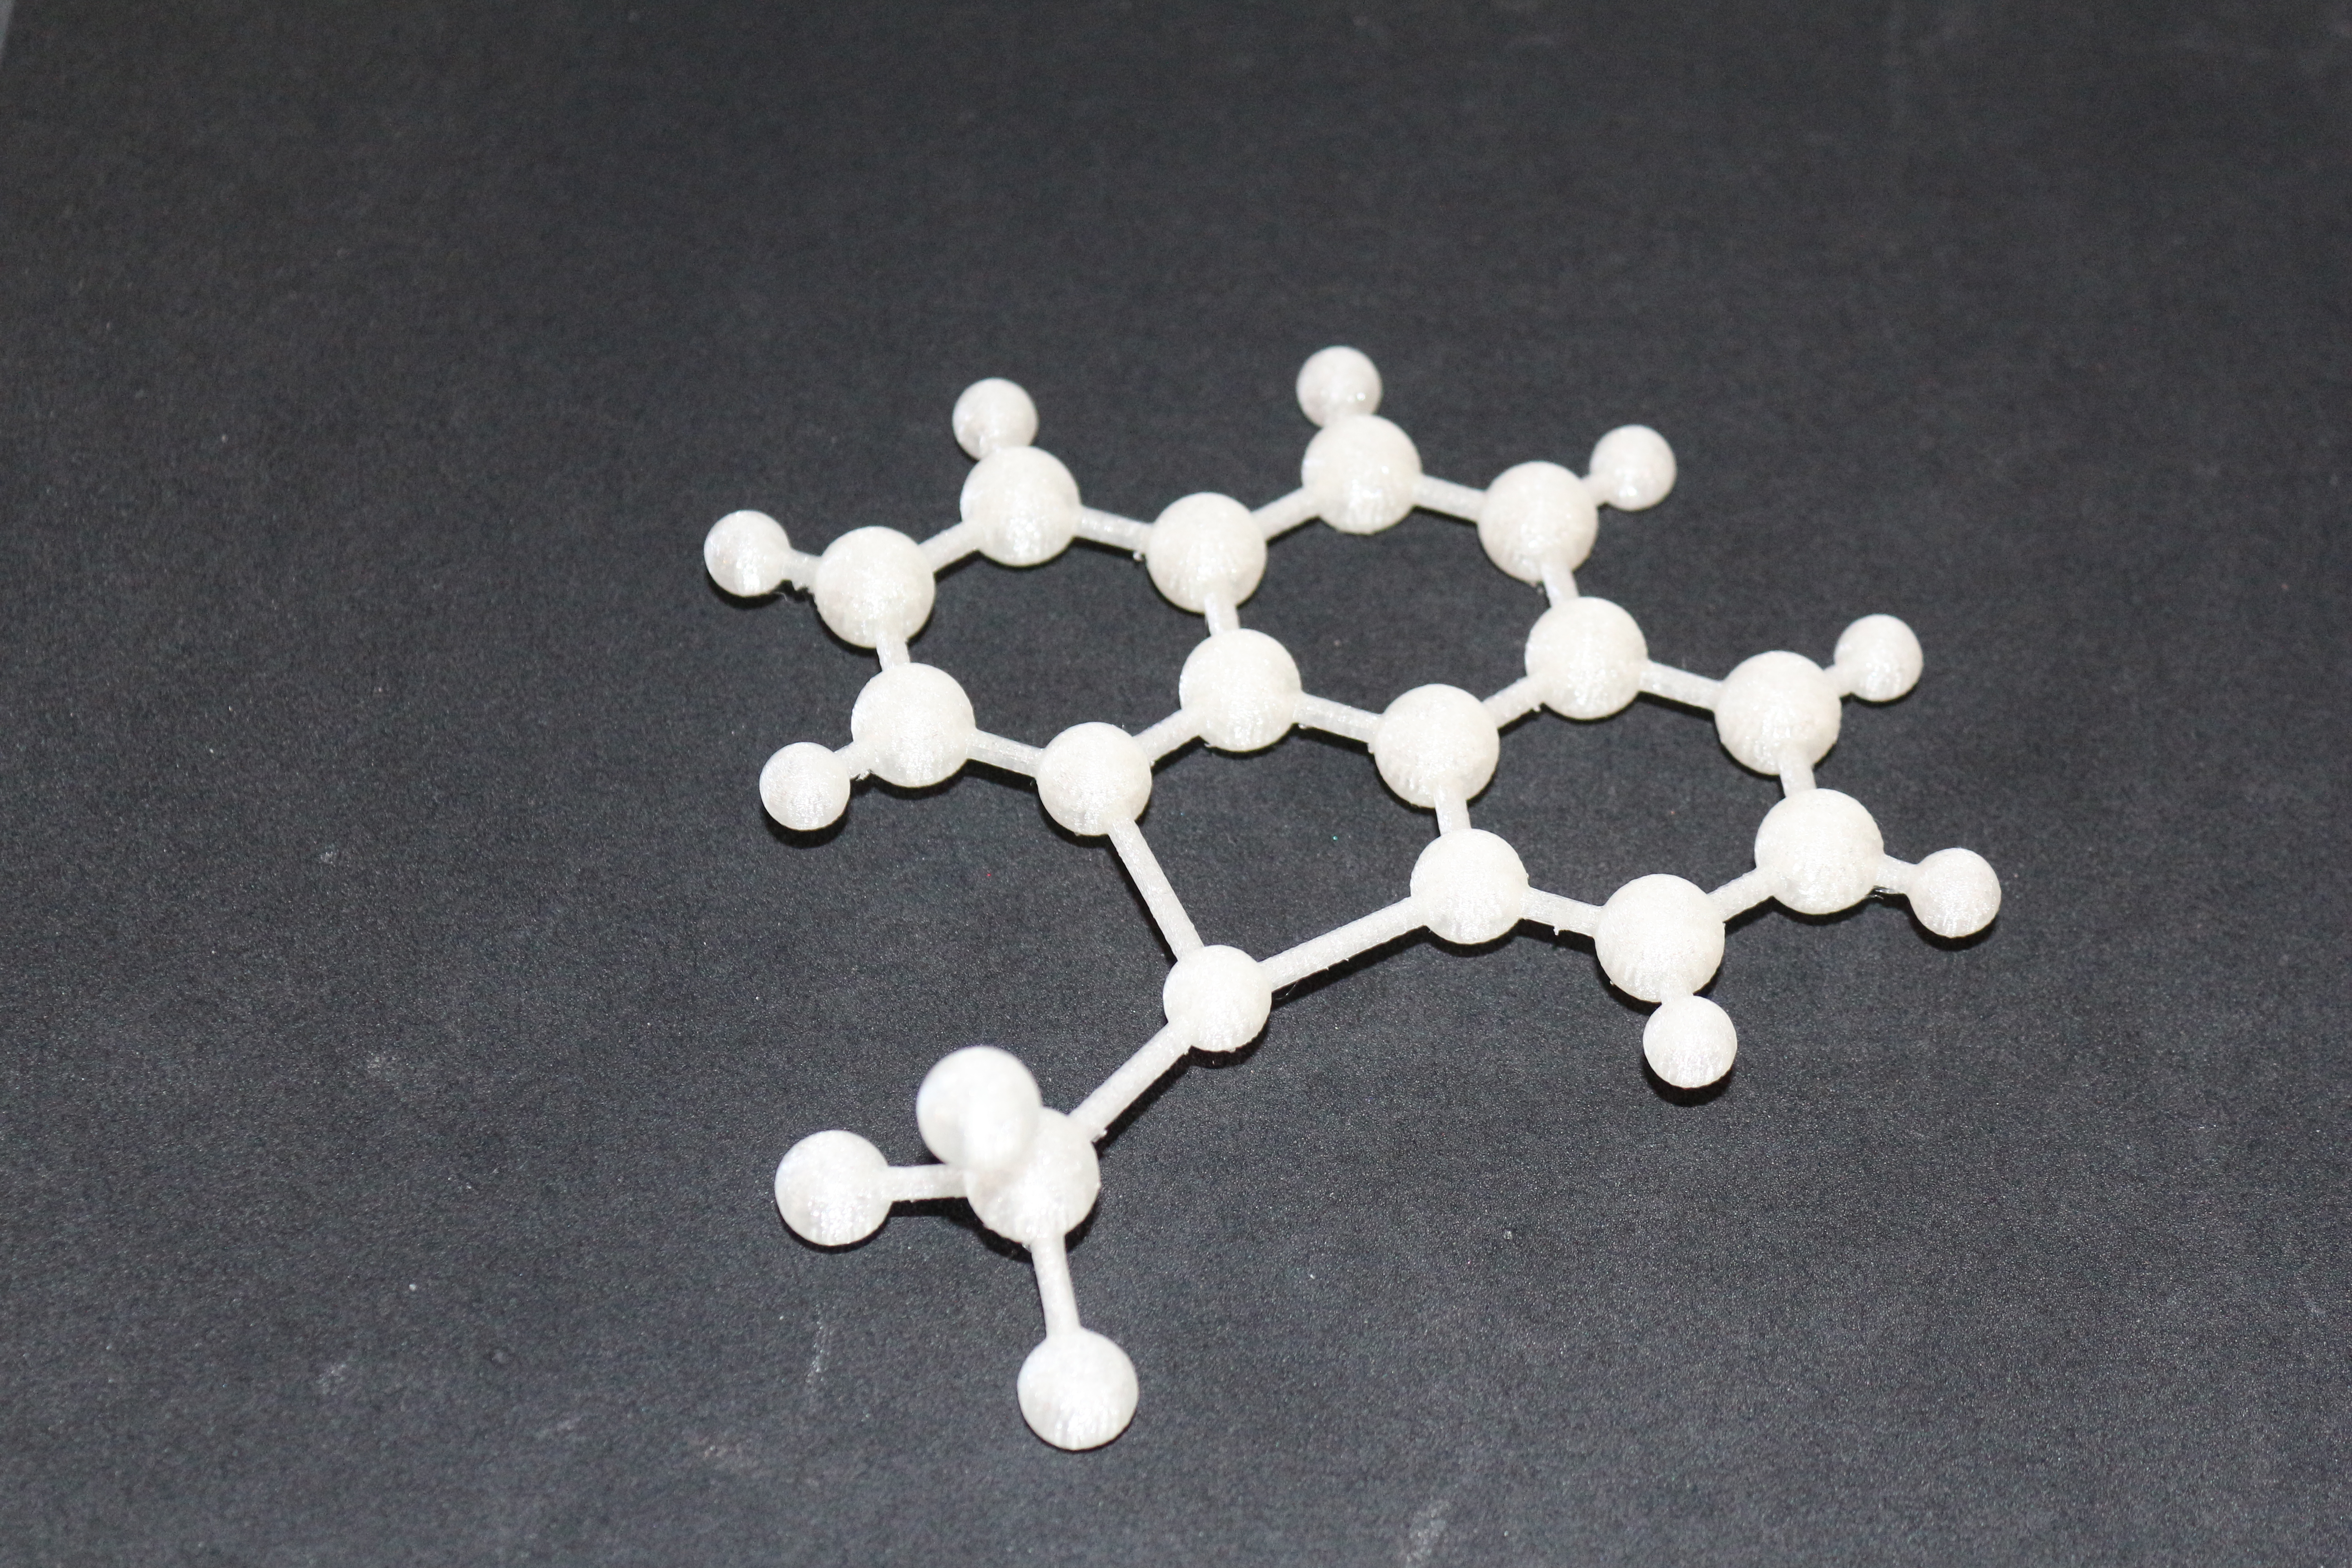 3D Printed Molecular Structure